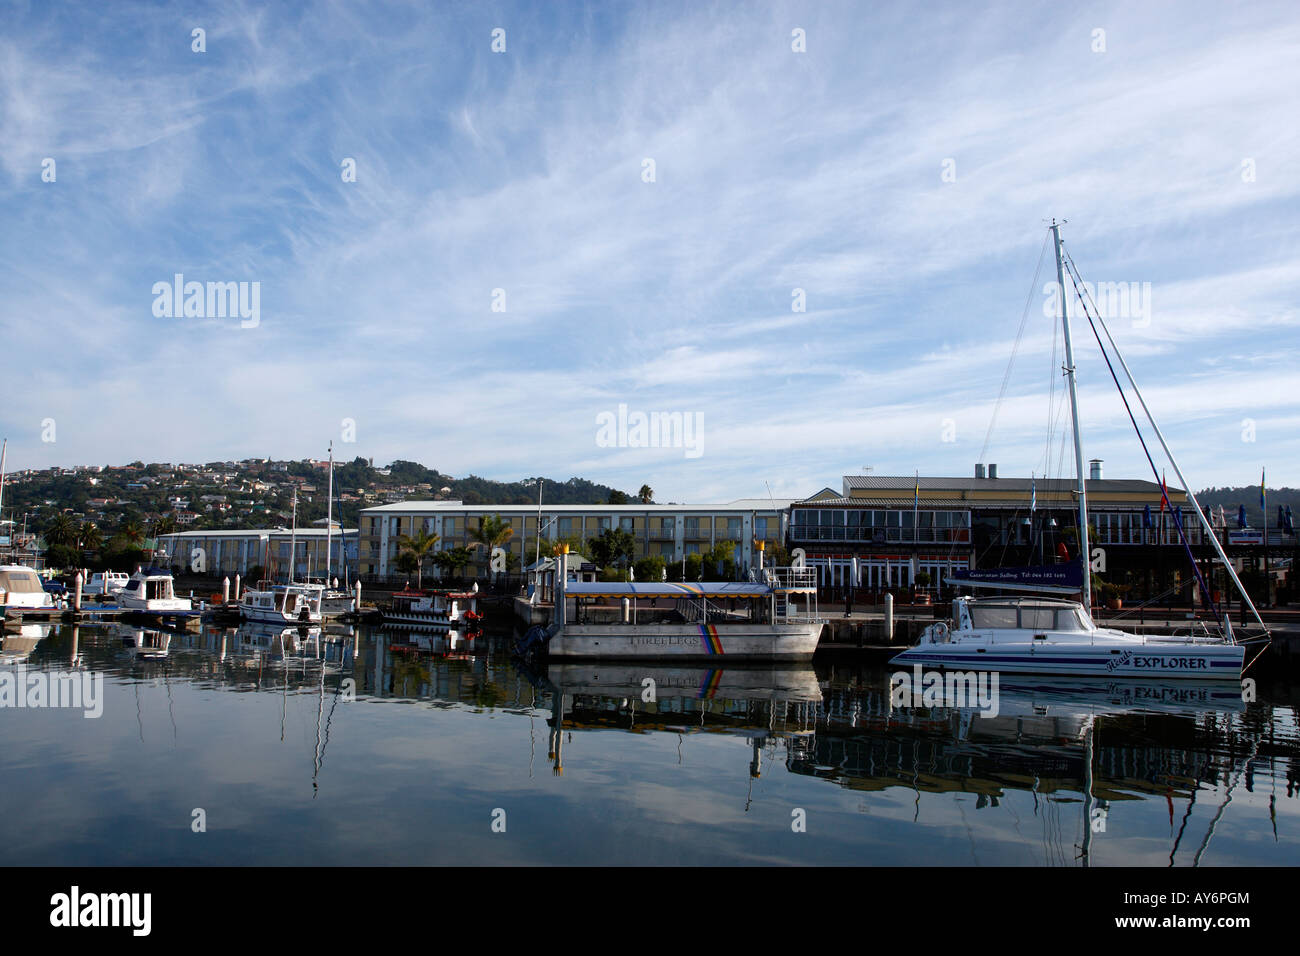 overlooking the waterfront and lagoon at knysna quays knysna garden route western cape province south africa Stock Photo